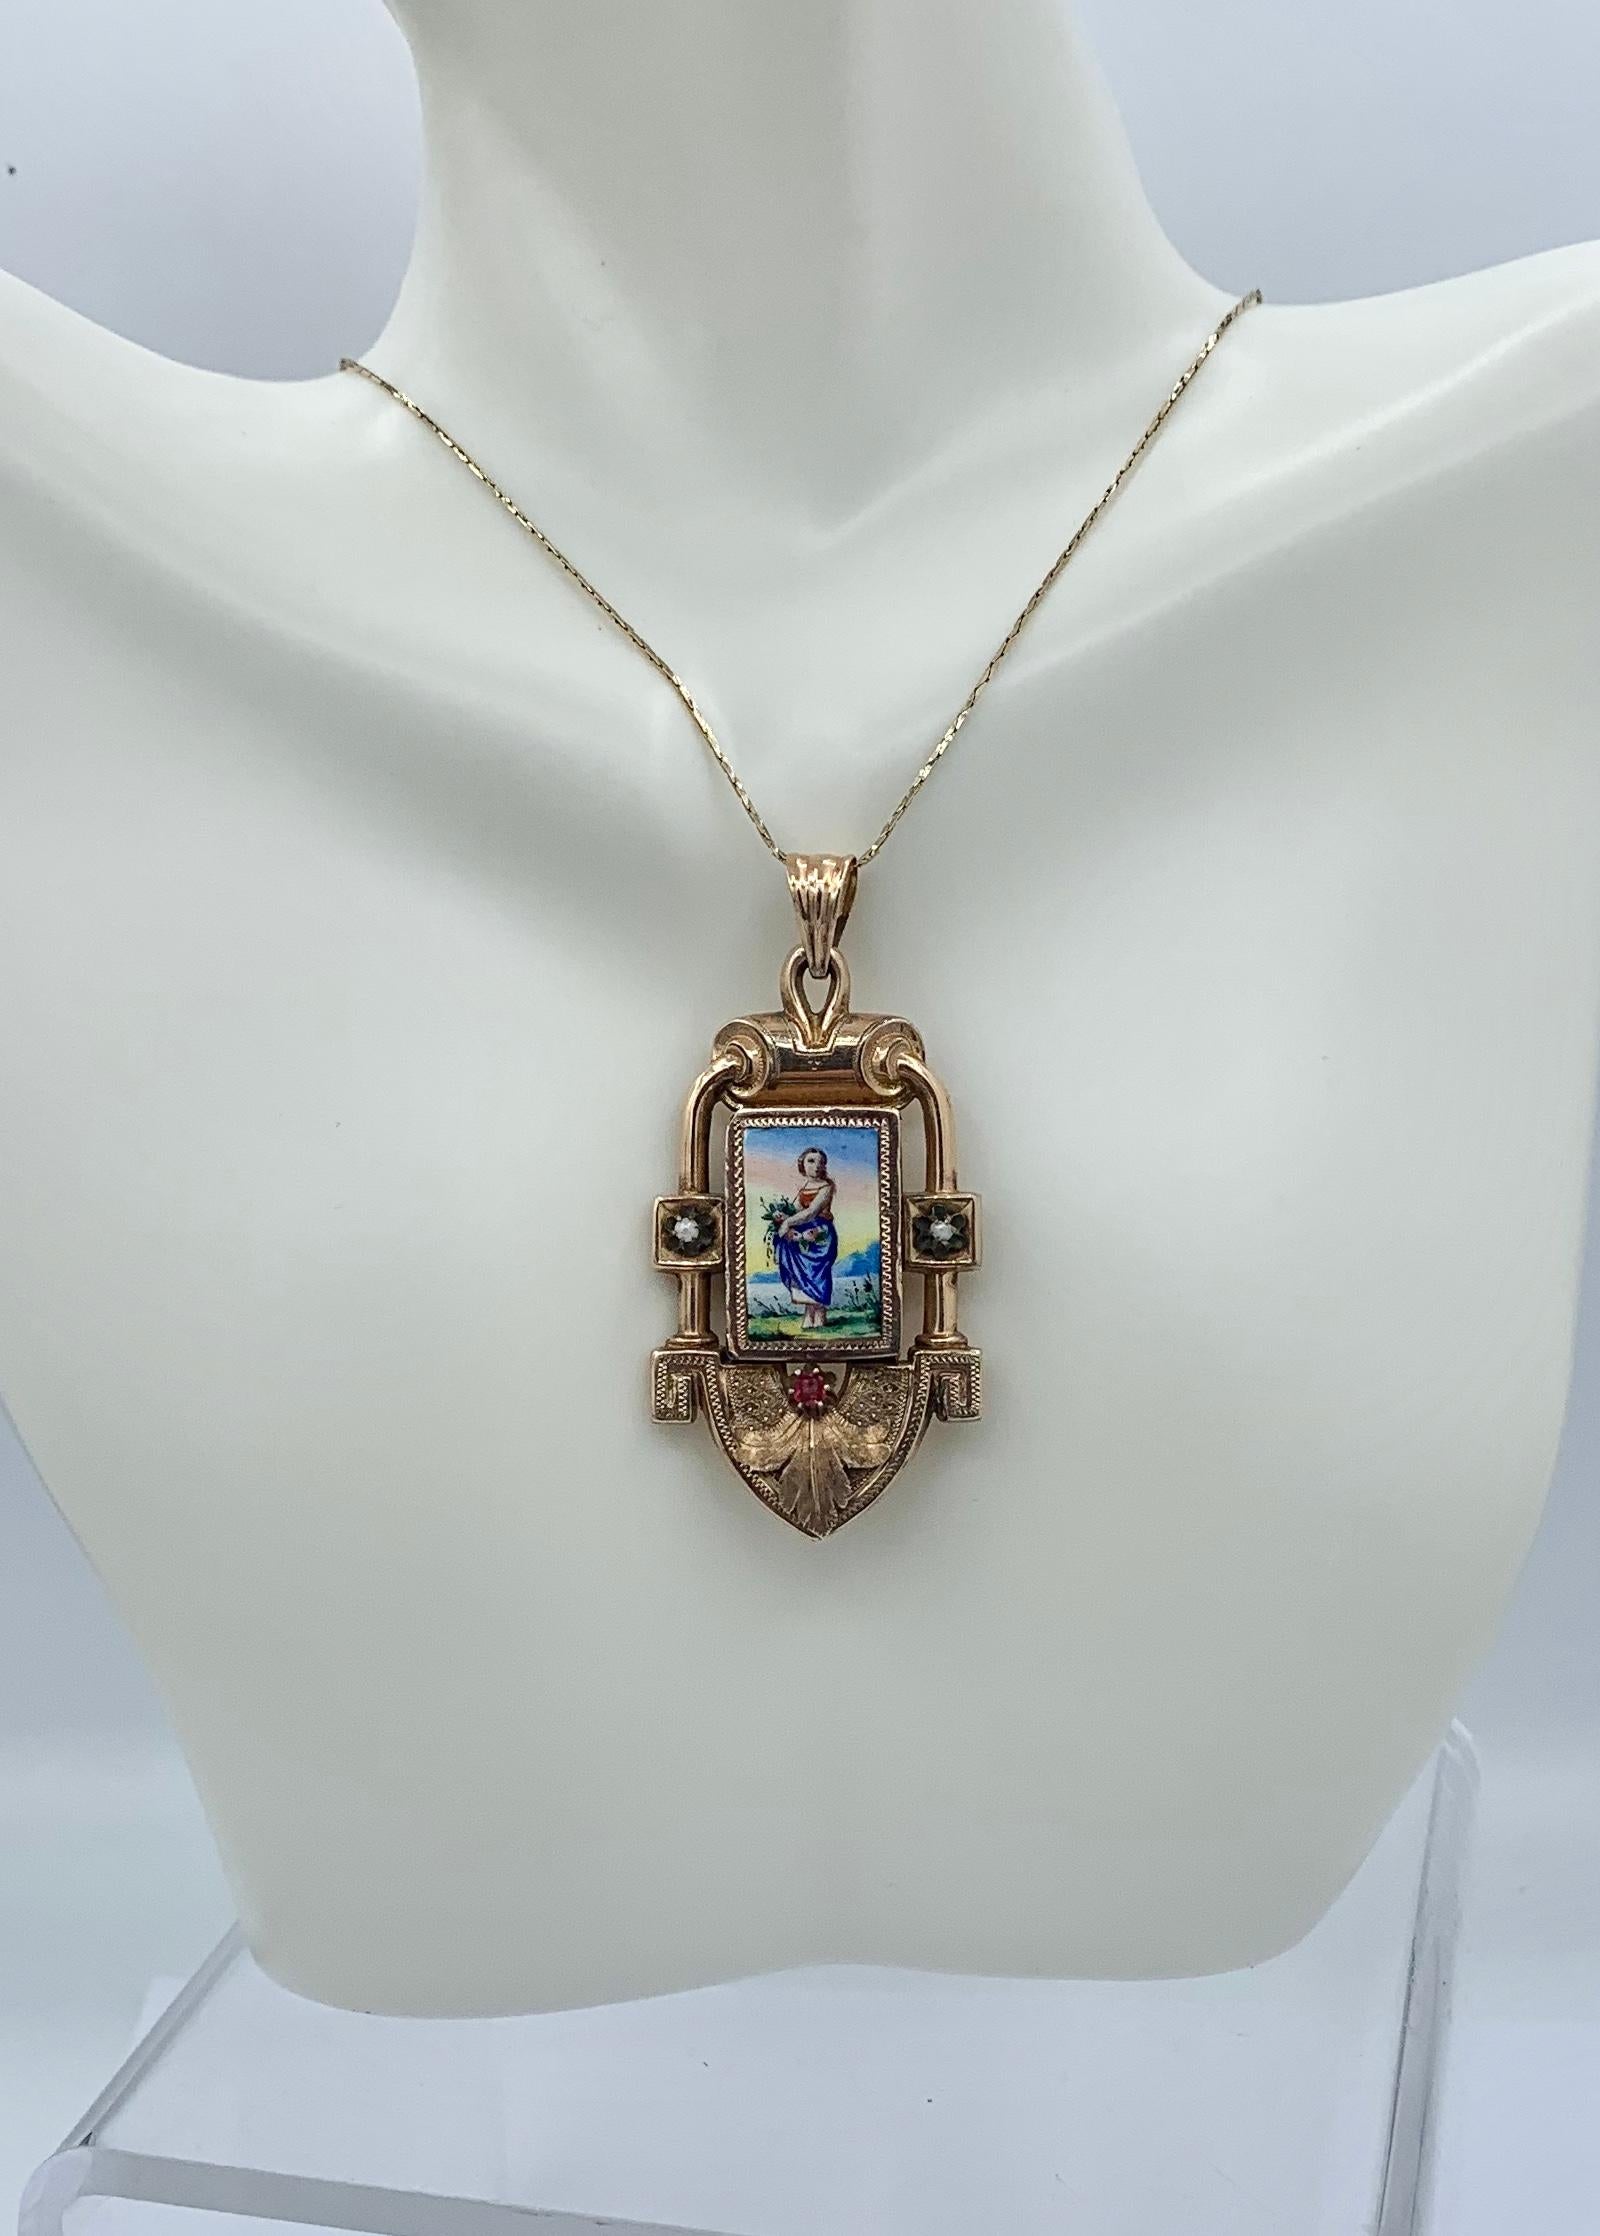 This is a rare and wonderful Victorian Enamel Ruby Pearl 14 Karat Gold Locket Pendant with an image of a woman carrying flowers. The romantic and charming image is done in enamel with gorgeous colors and details.  The maiden carries flowers